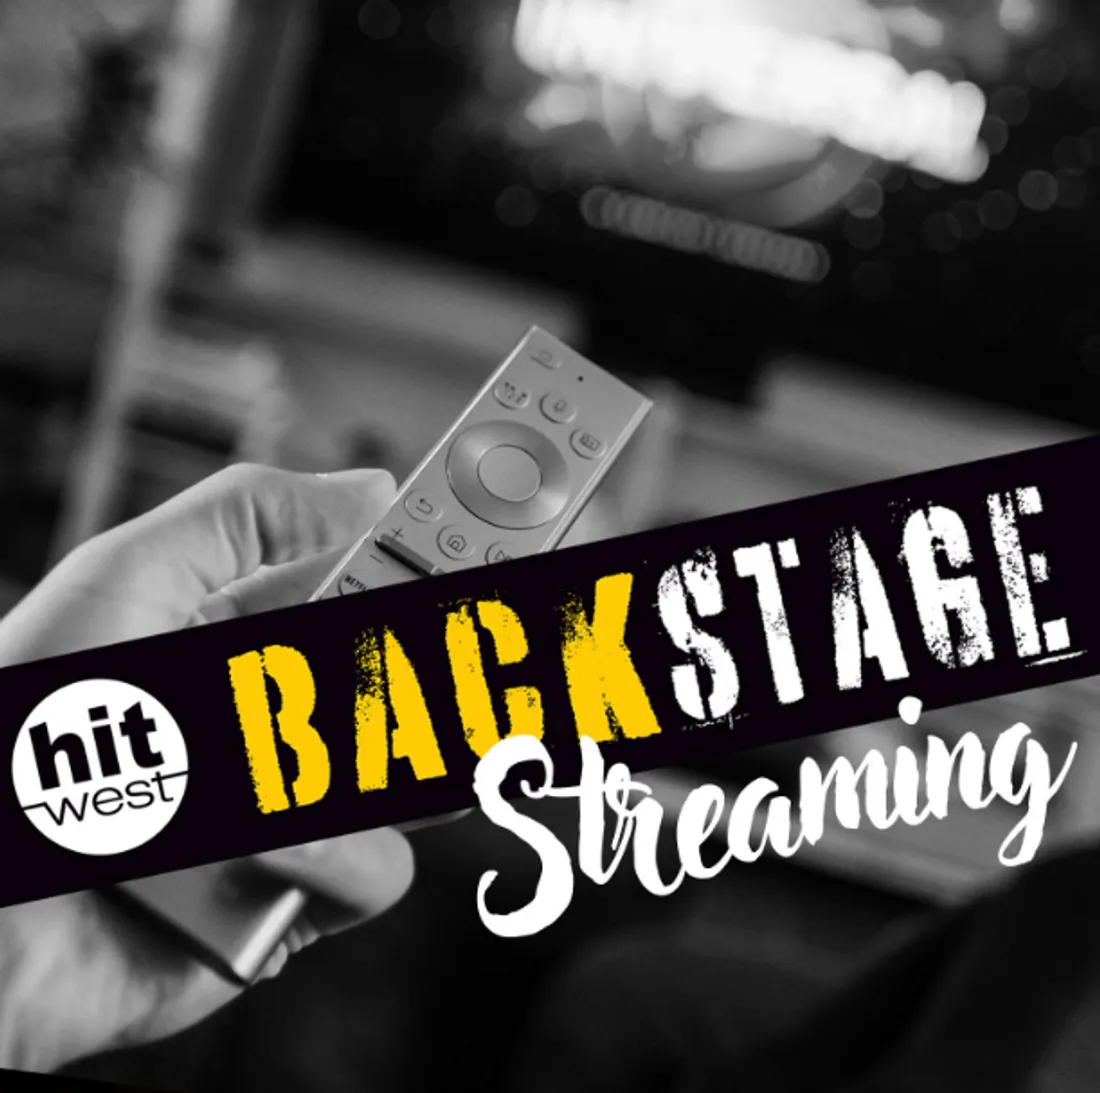 backstage streaming